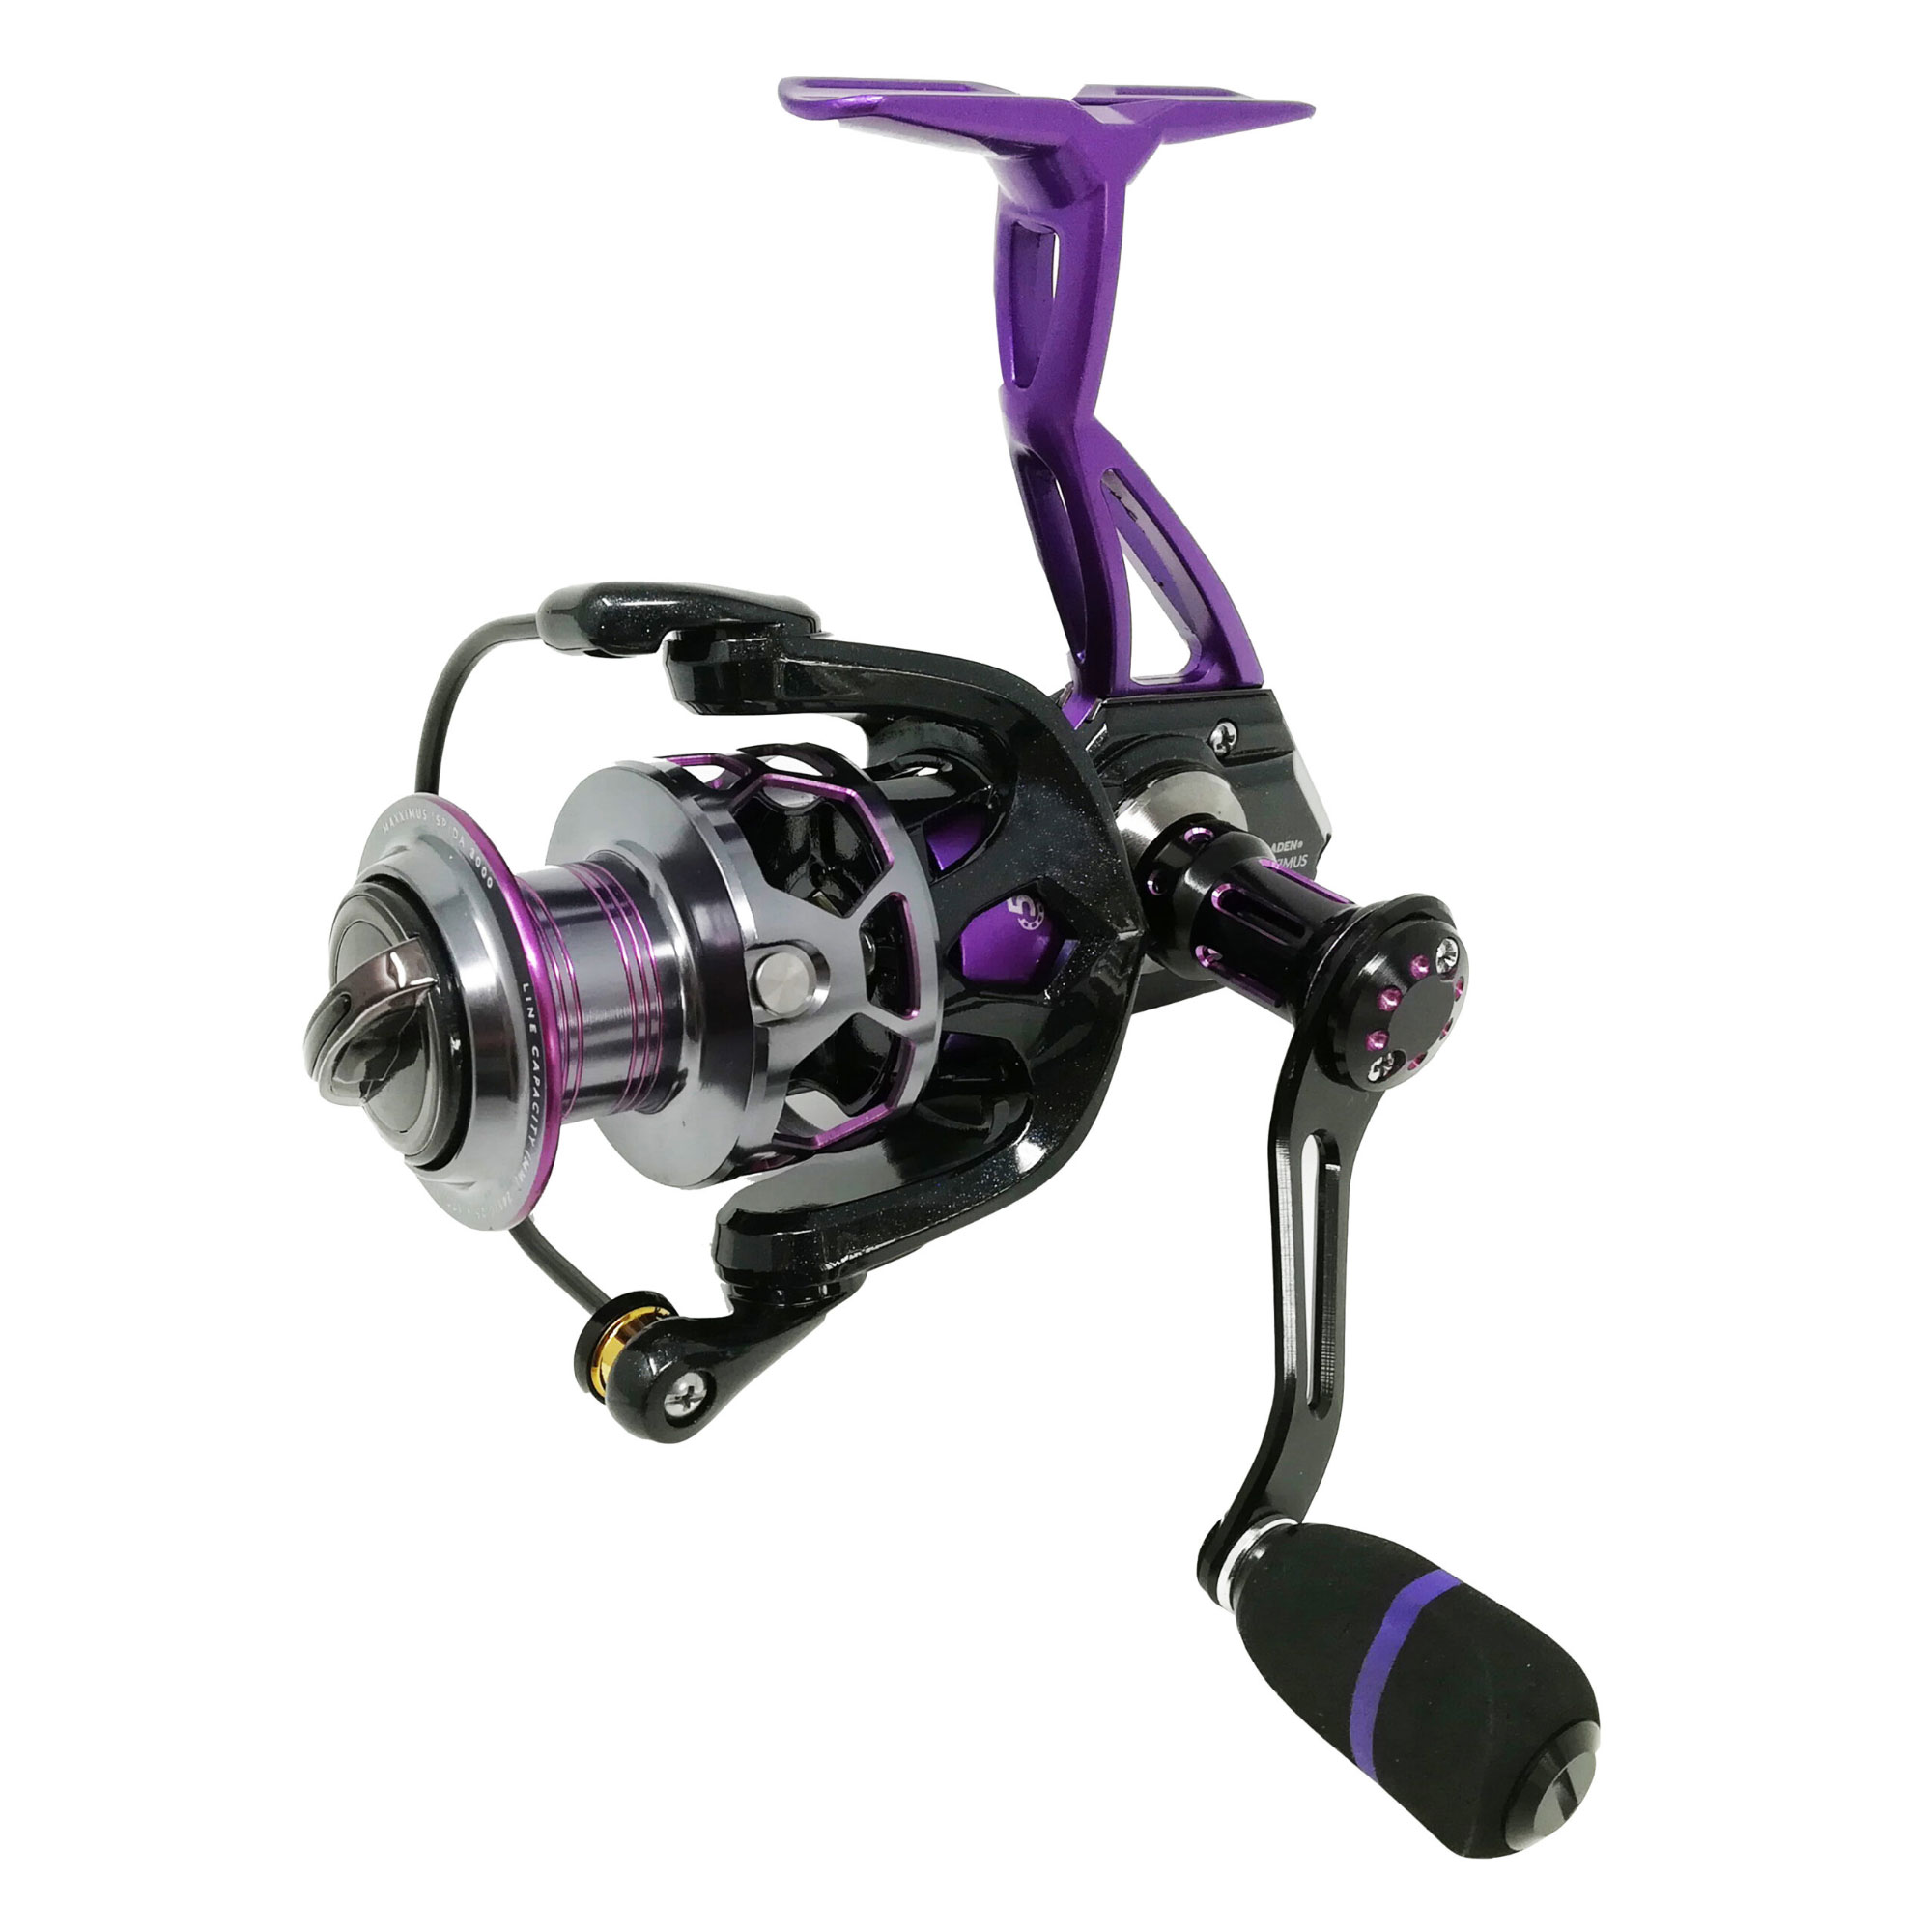 Fladen Maxximus Ispida Spinning Reel FD3000 – Glasgow Angling Centre